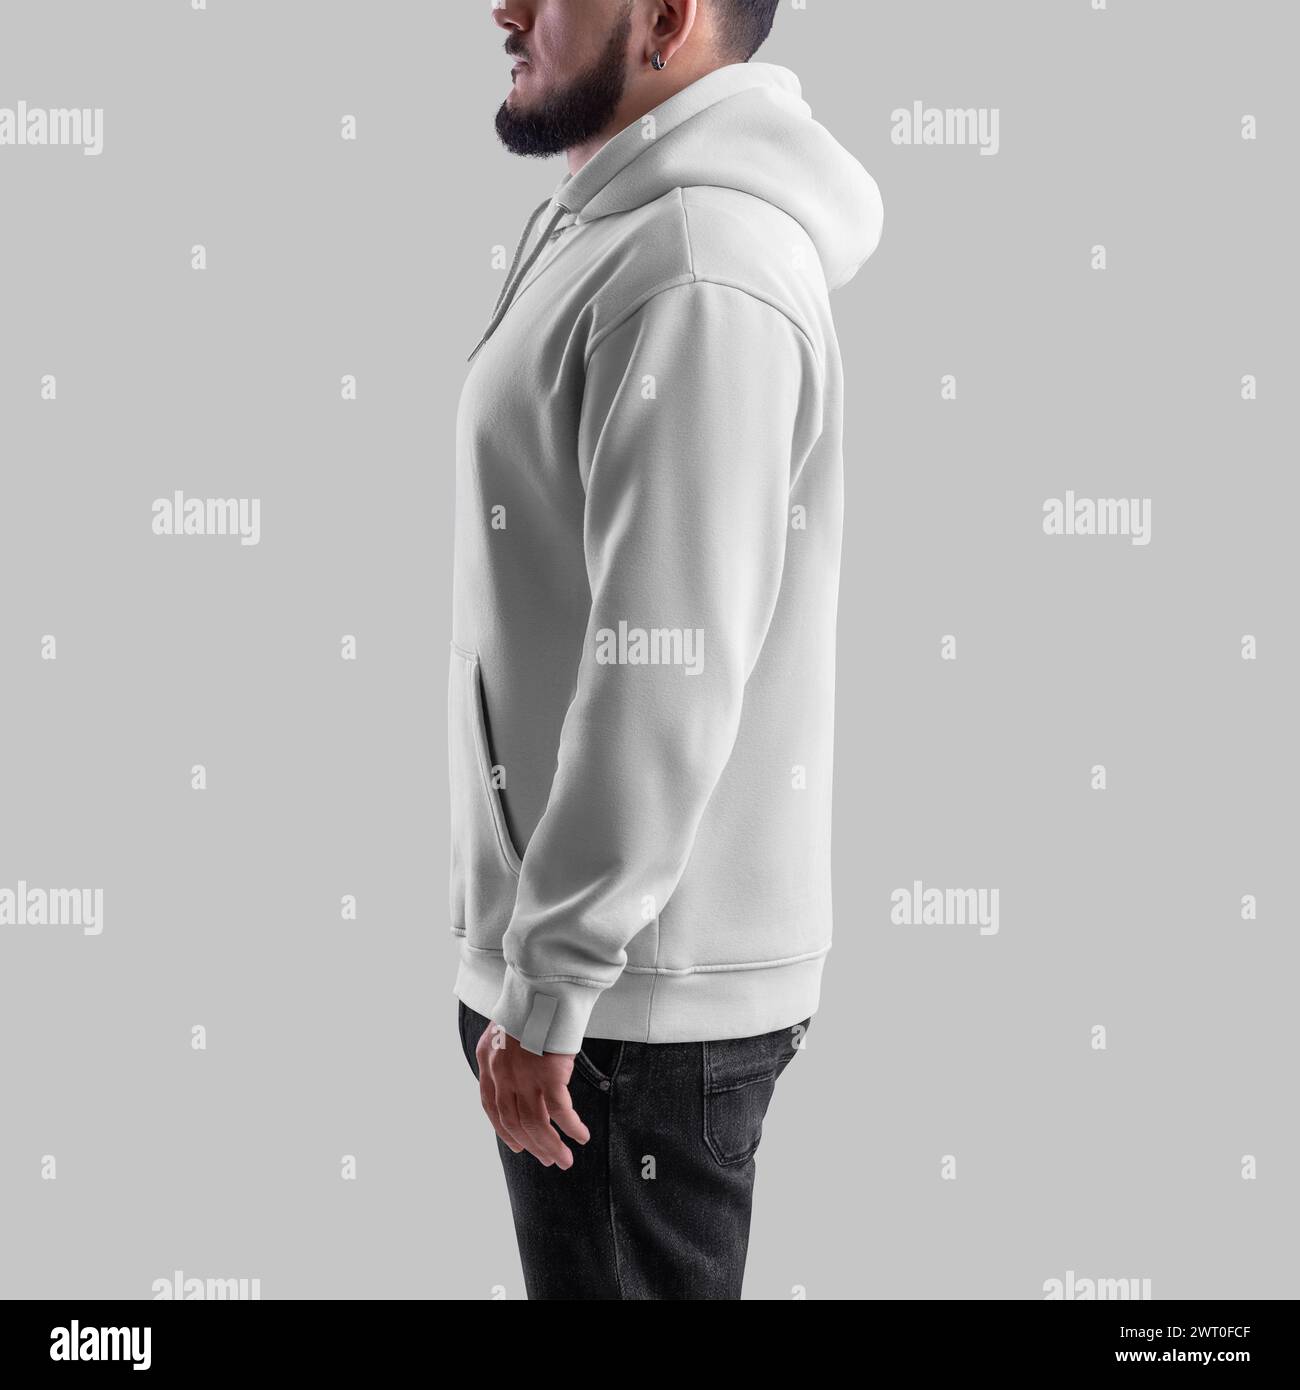 Oversized white hoodie template on bearded man, side view, textile apparel with pocket, laces, label for design. Mockup of a stylish male sweatshirt. Stock Photo